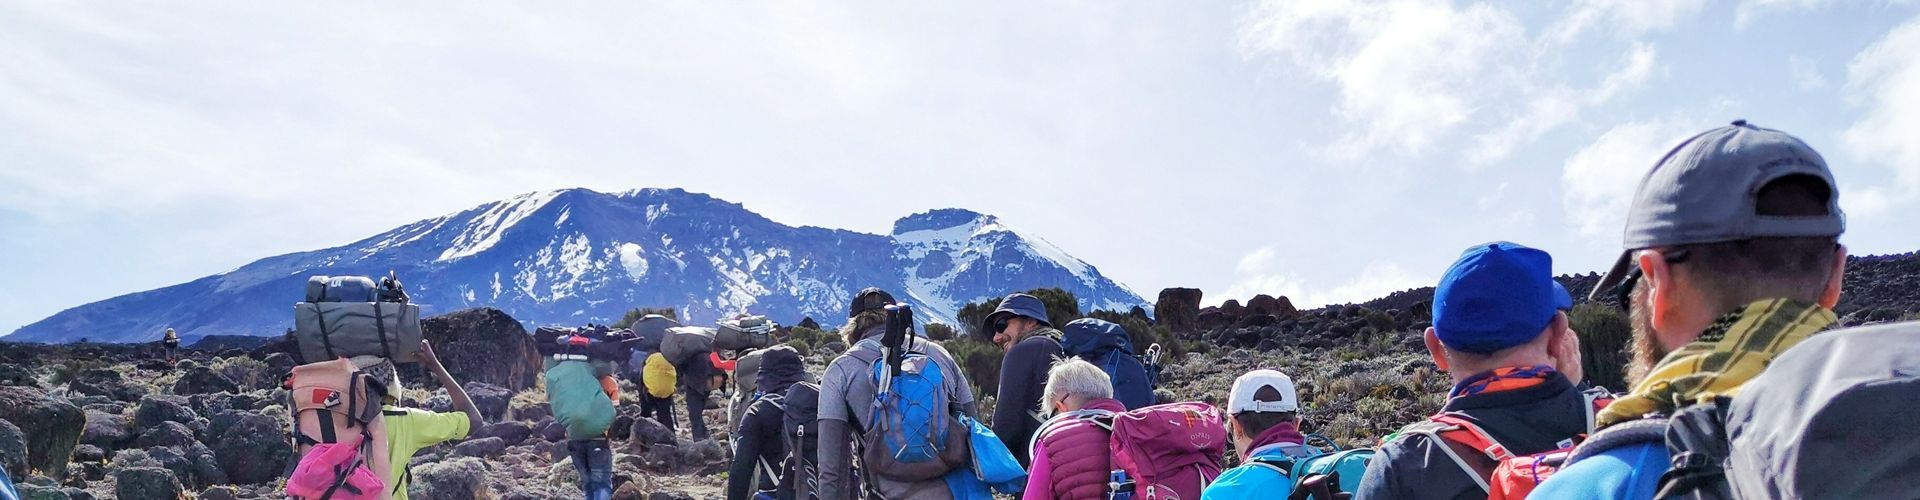 The Beginners Guide to the climbing Kilimanjaro